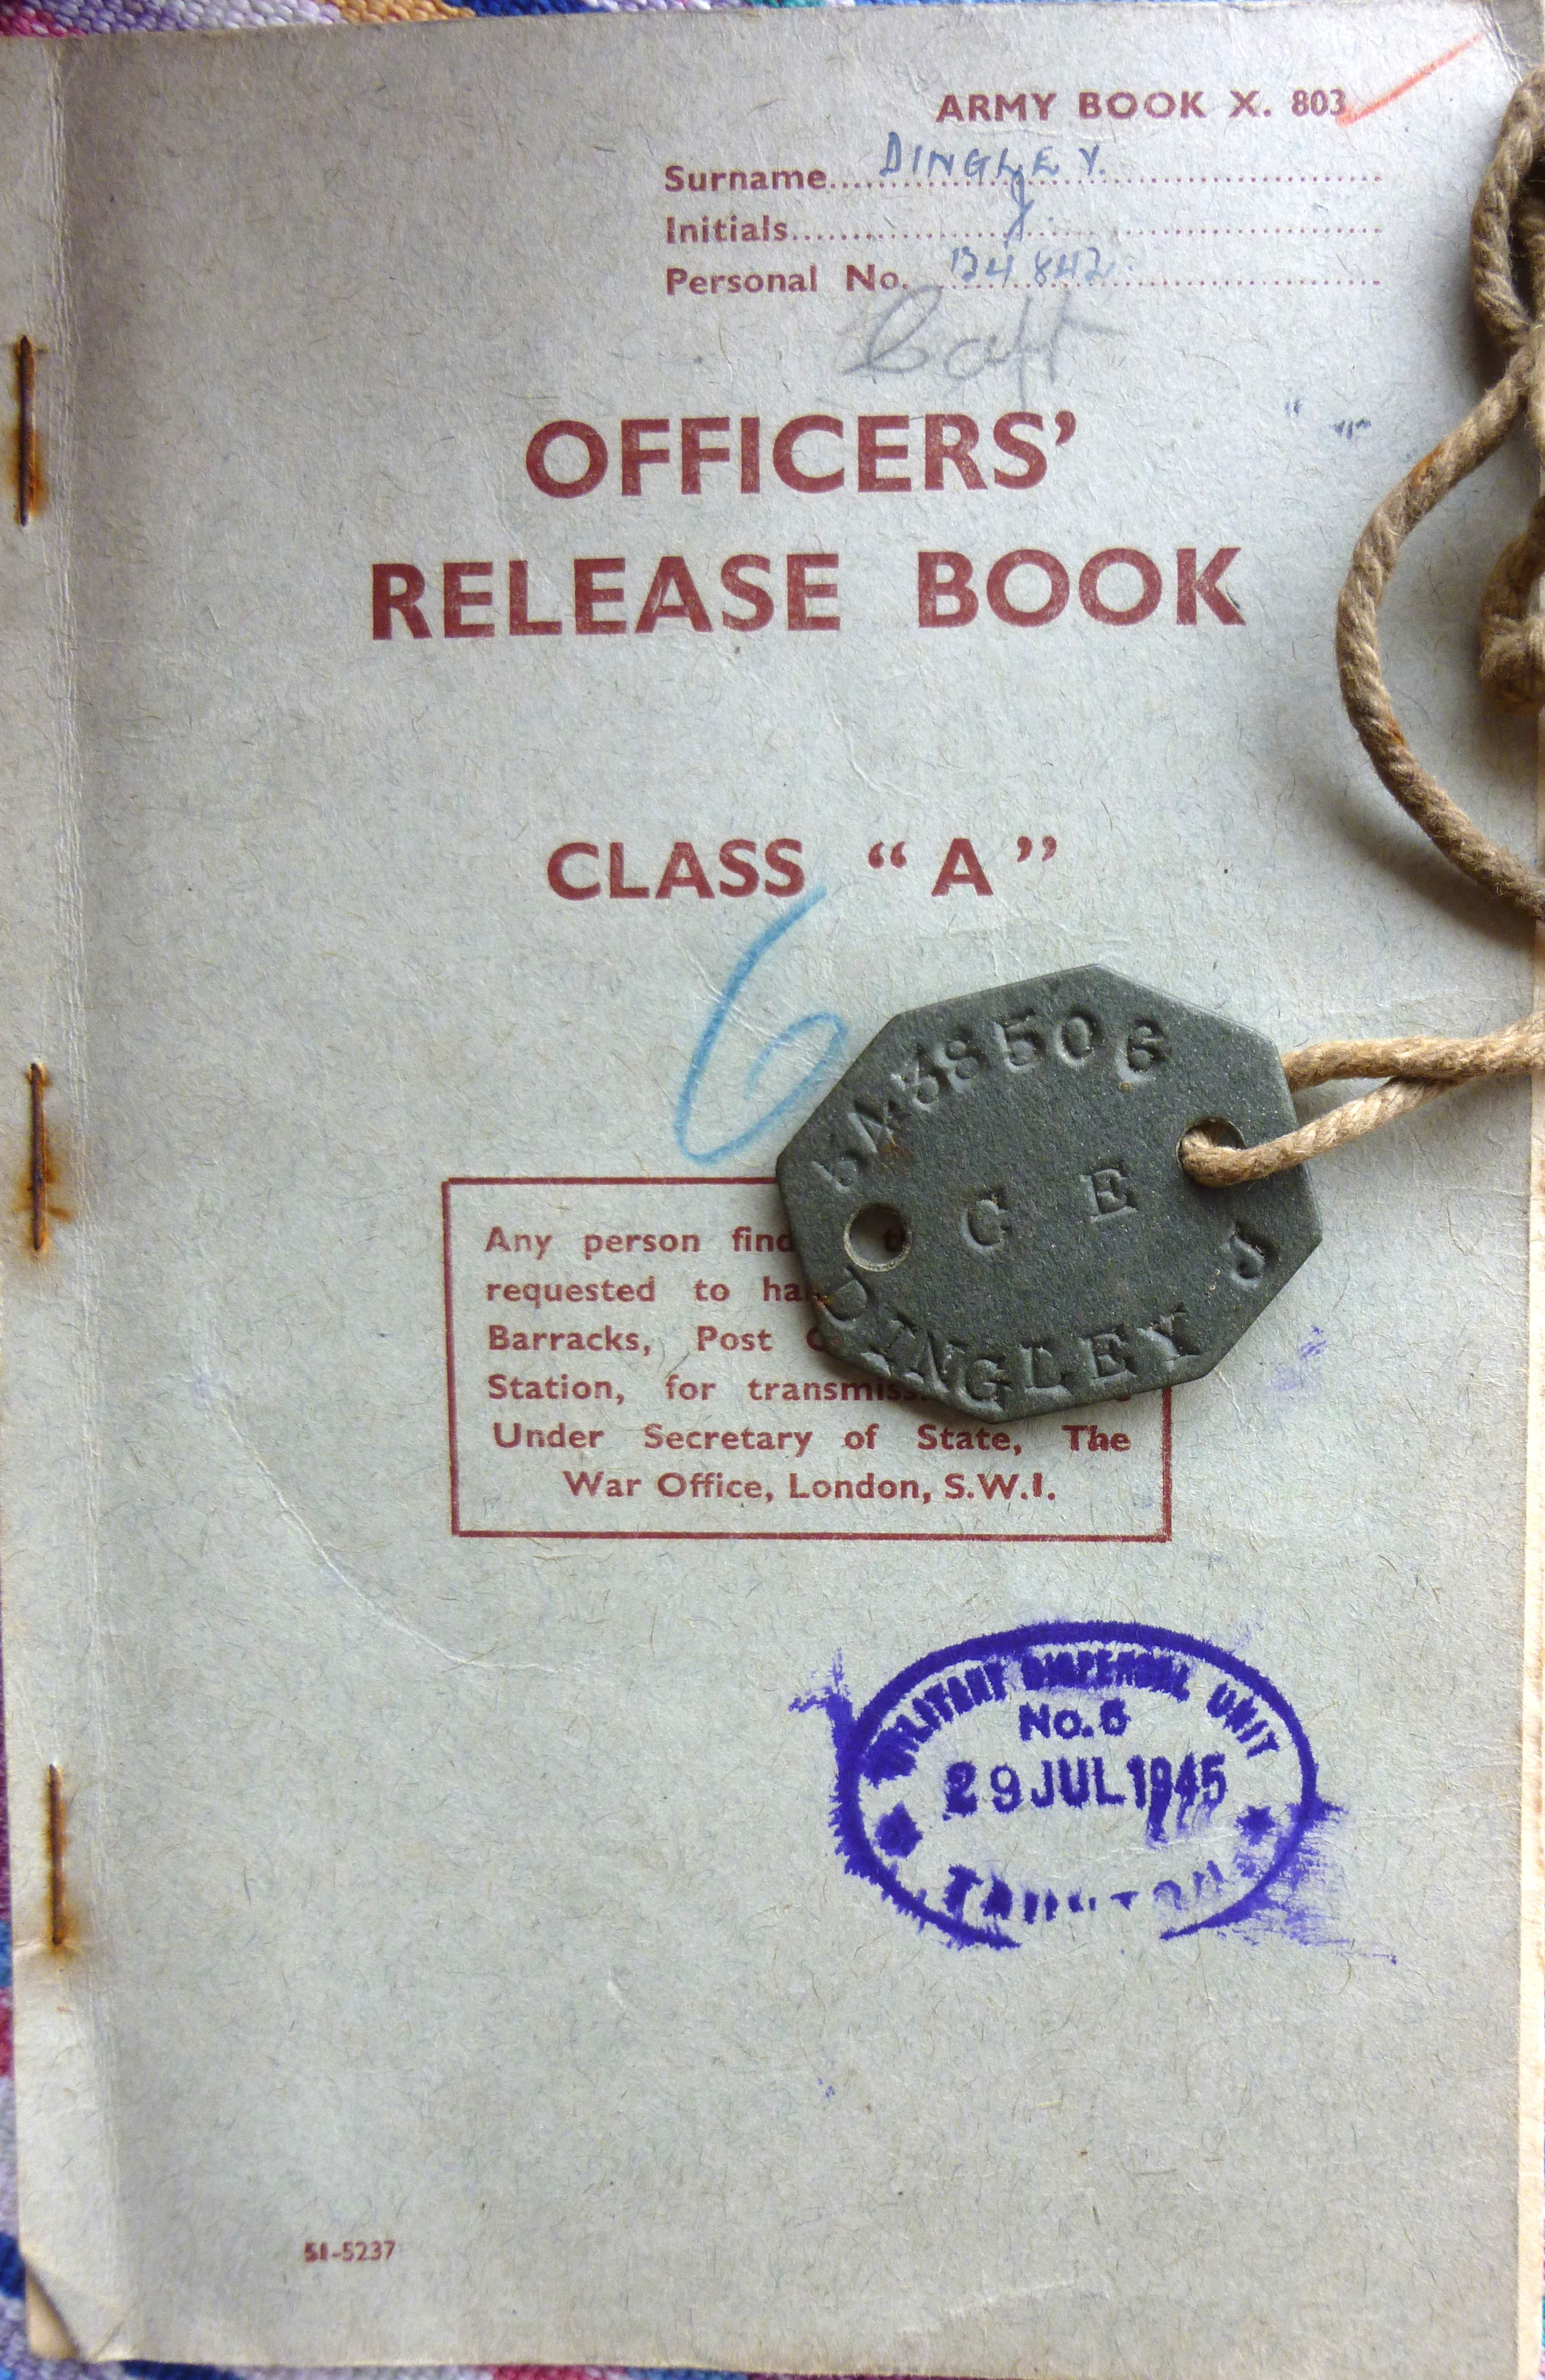 John Dingley officers book and dog tag